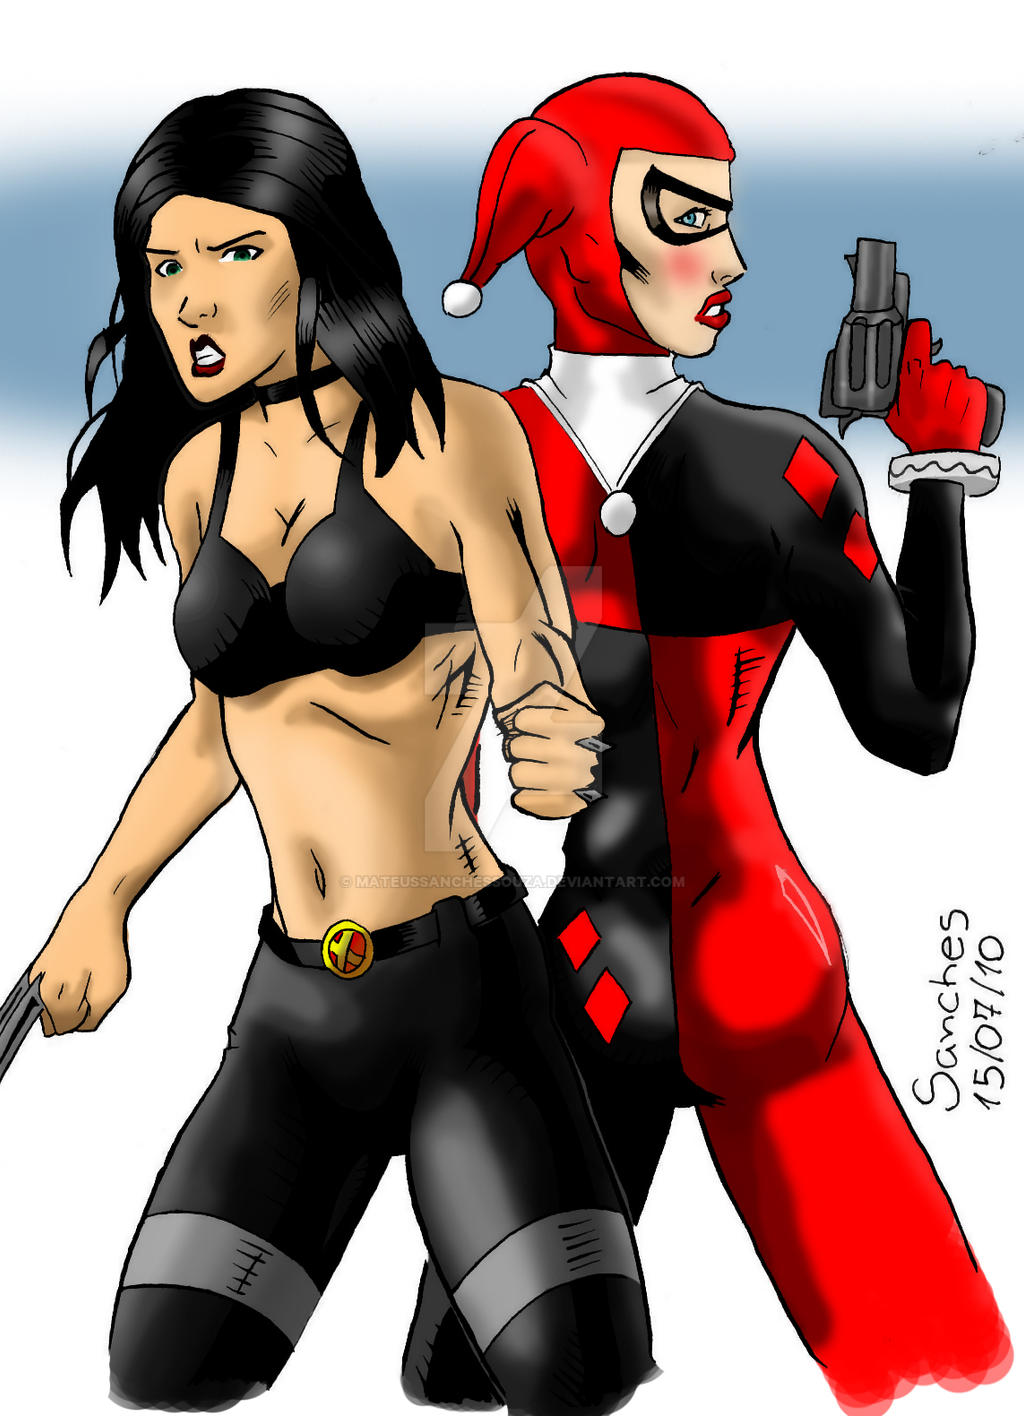 X 23 and Harley Quinn